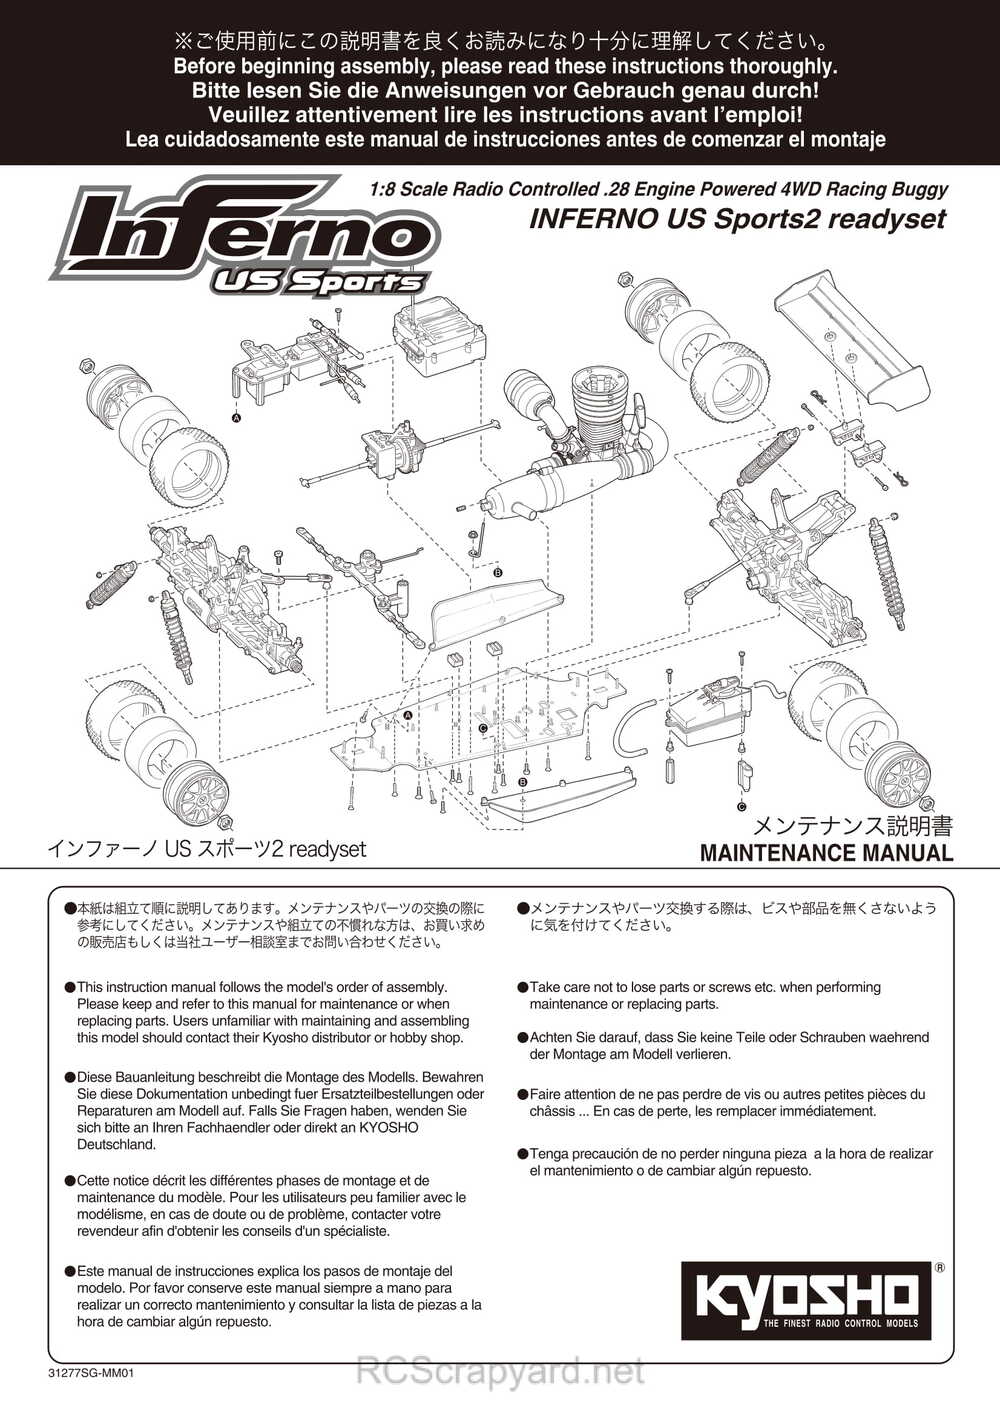 Kyosho - 31277SG - Inferno-US-Sports2 - Manual - Page 01